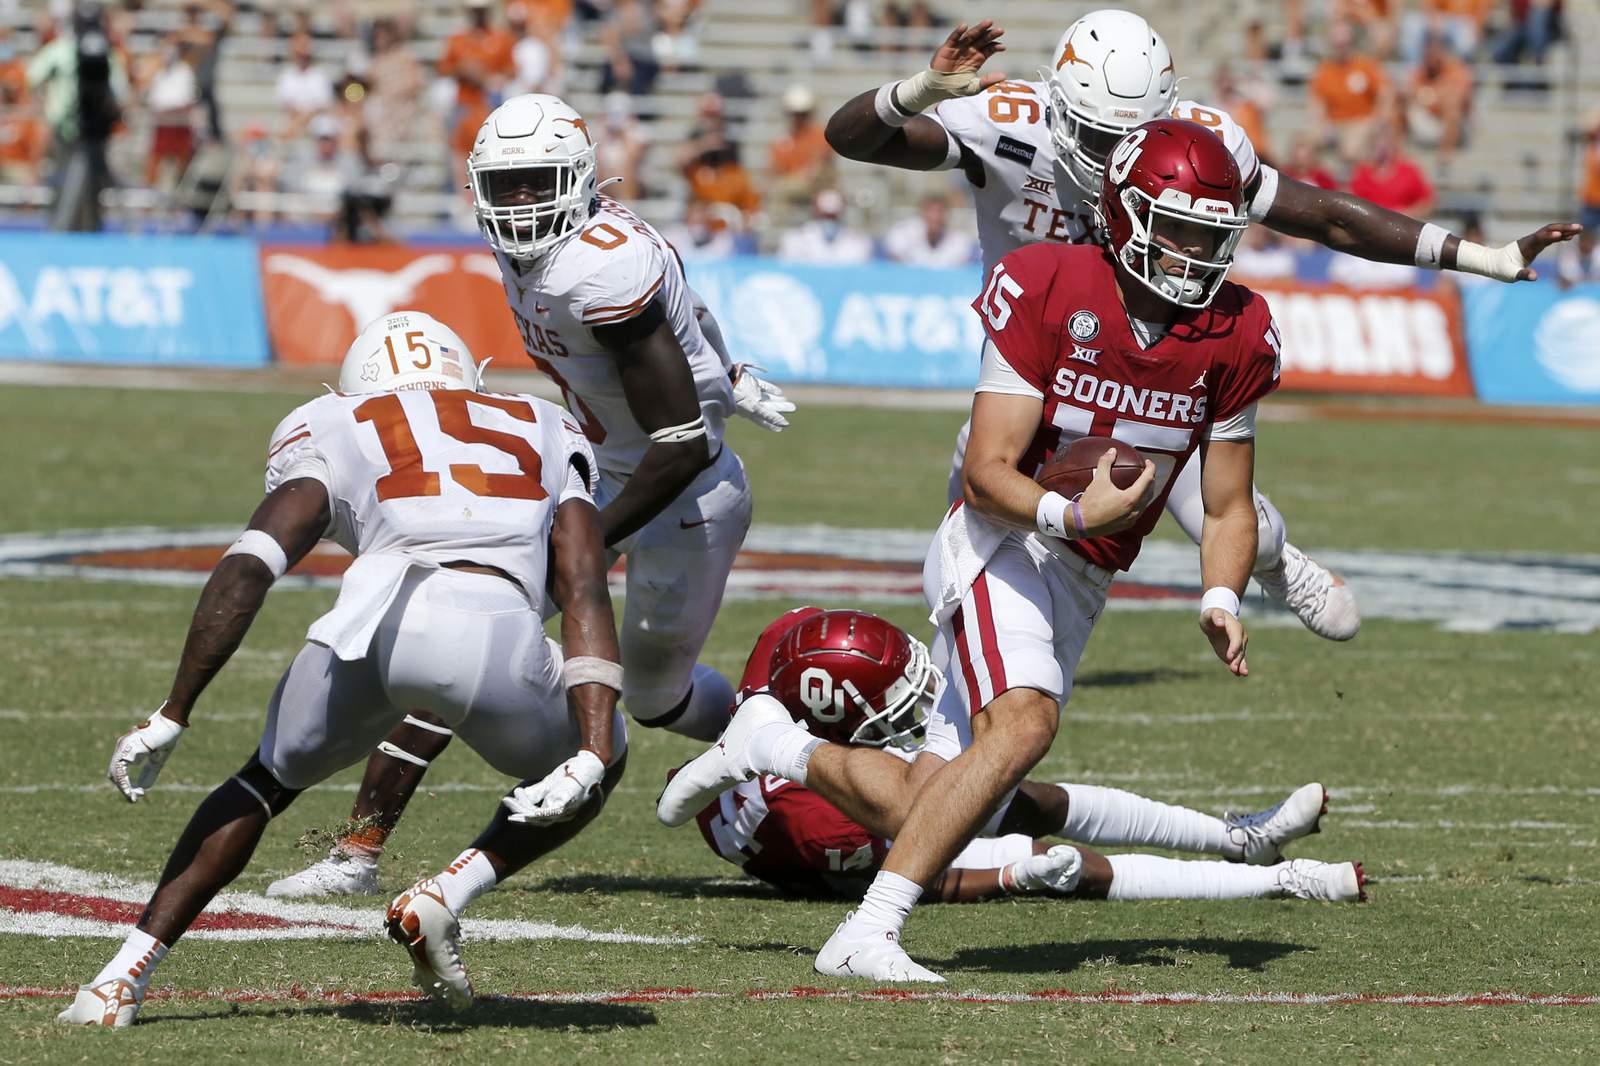 Rattler TD pass in 4th OT sends OU past No. 22 Texas 53-45